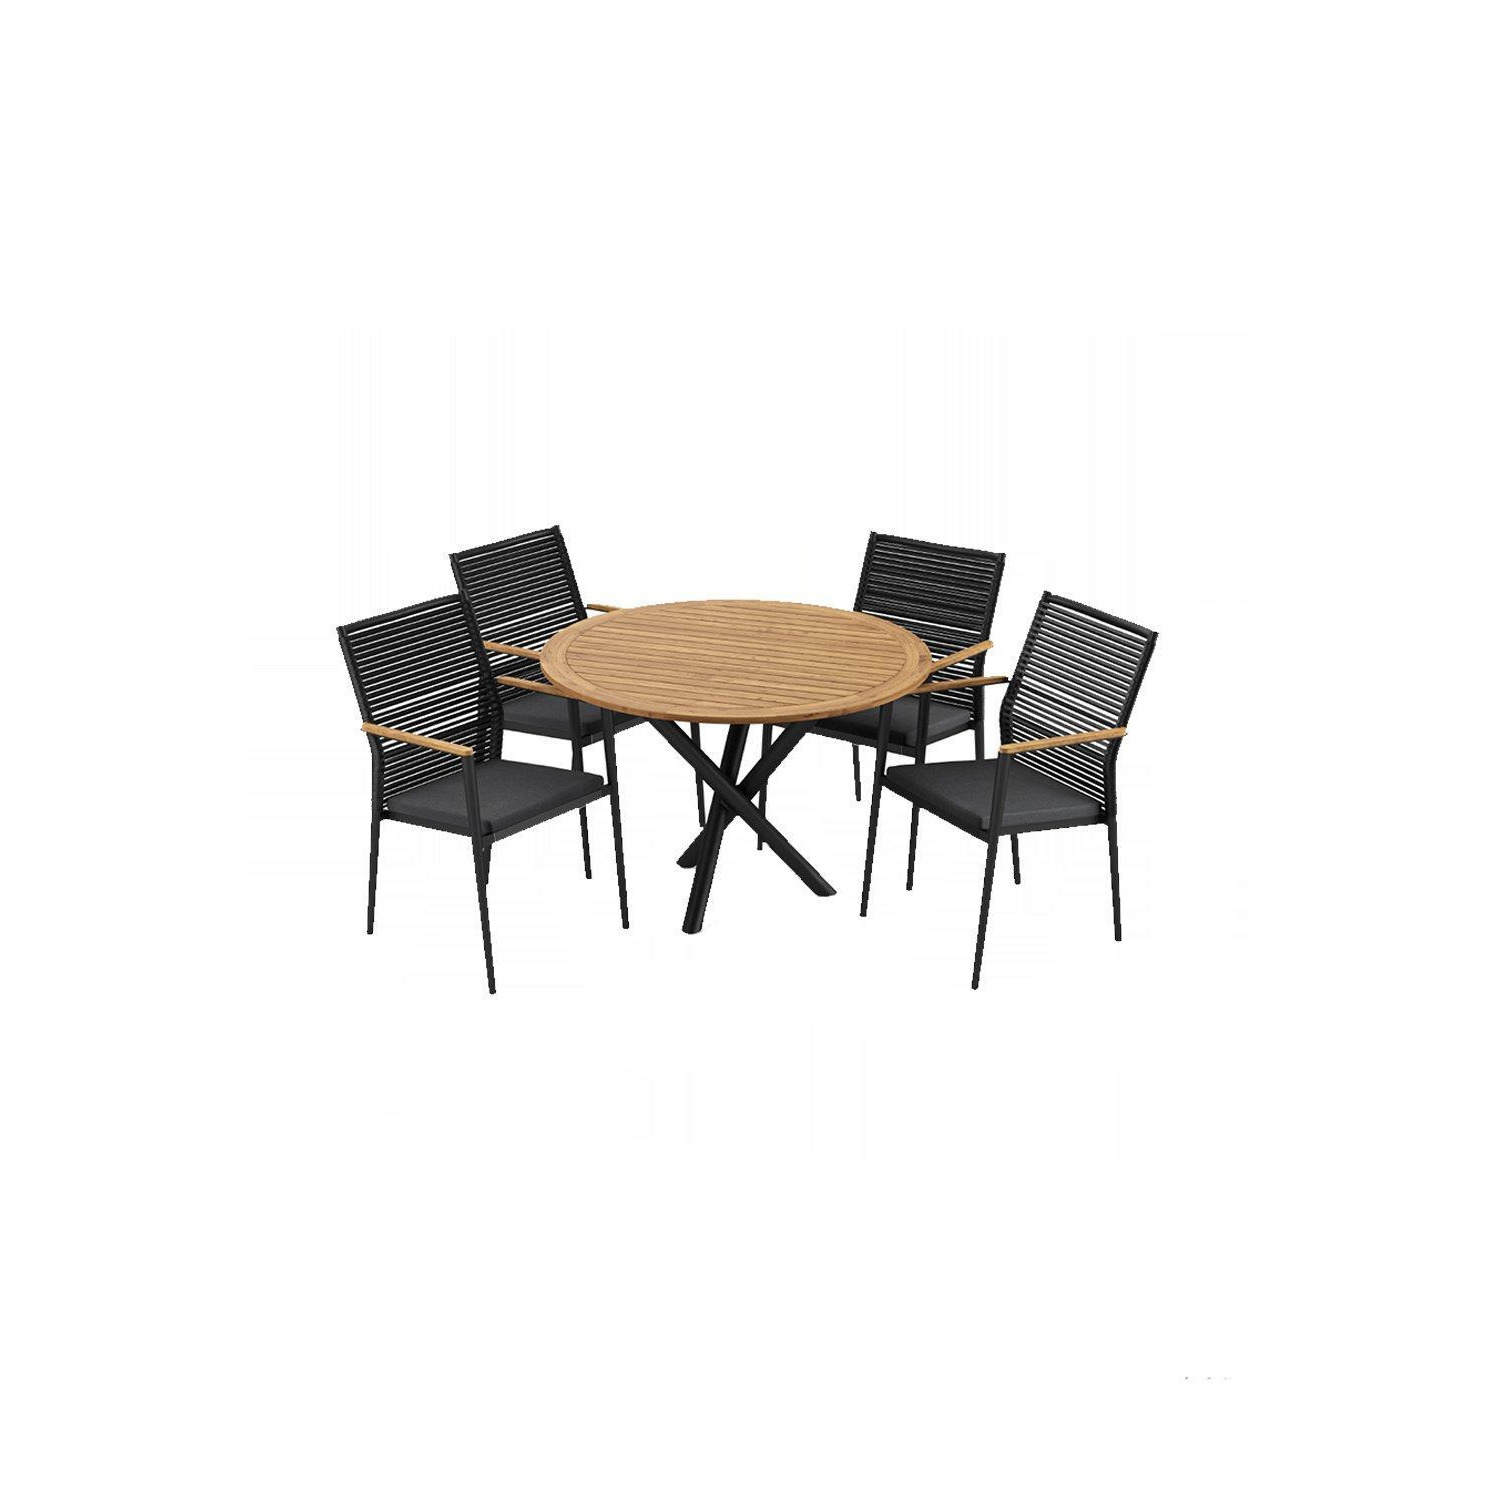 Portland 4 Seat Round Dining Set with Teak Table in Charcoal - image 1